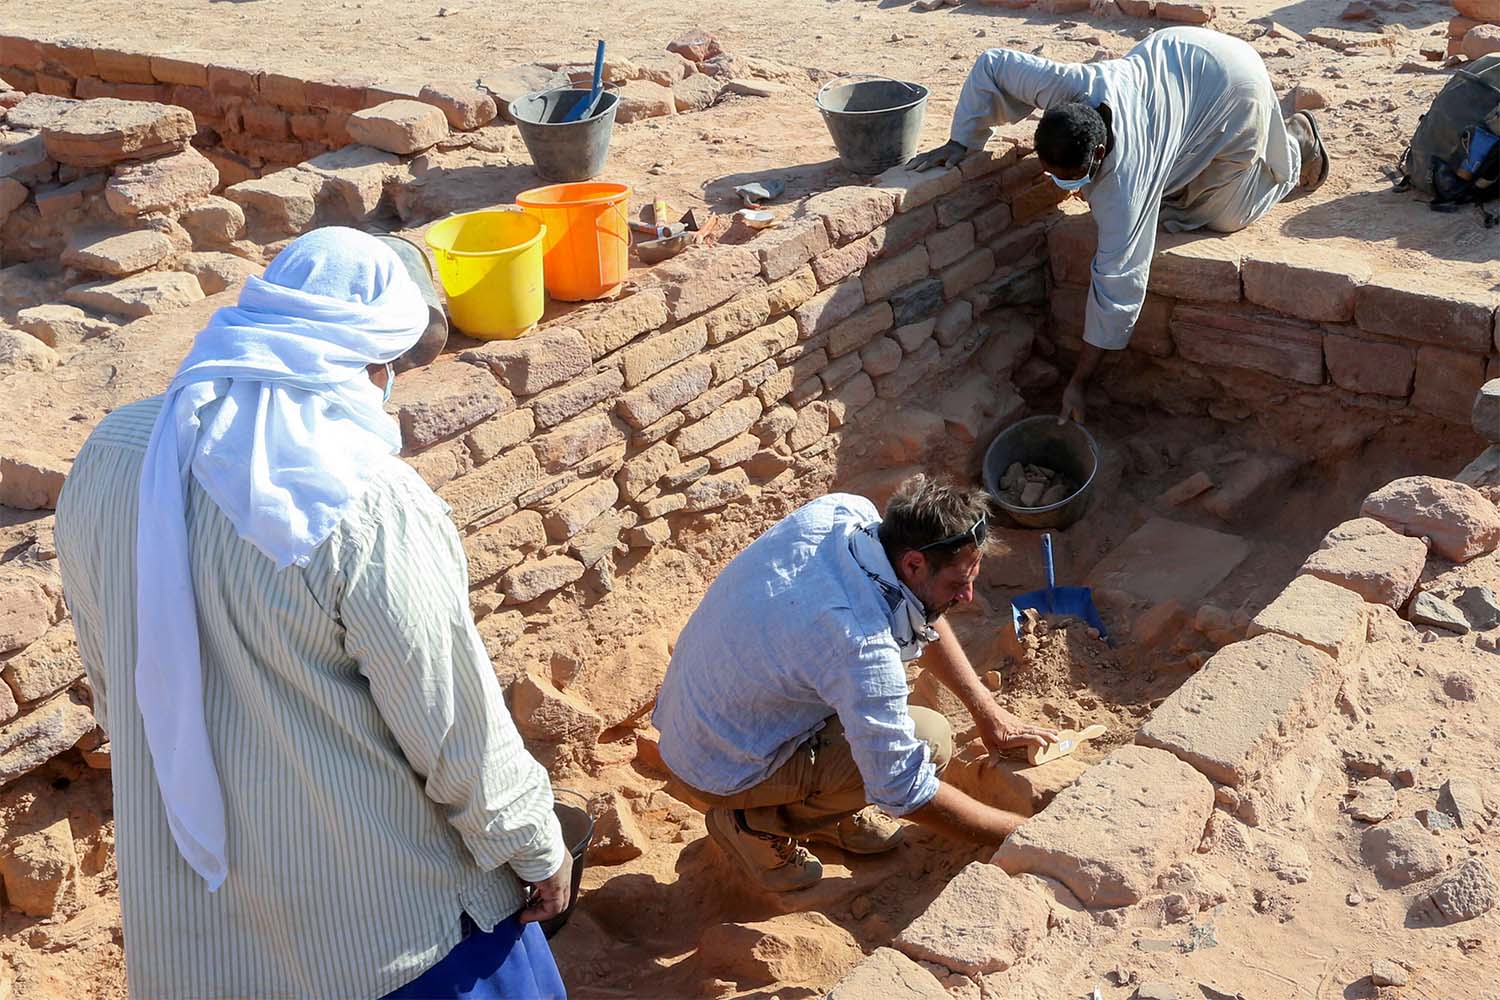 Priceless history is being unearthed in Al Ula